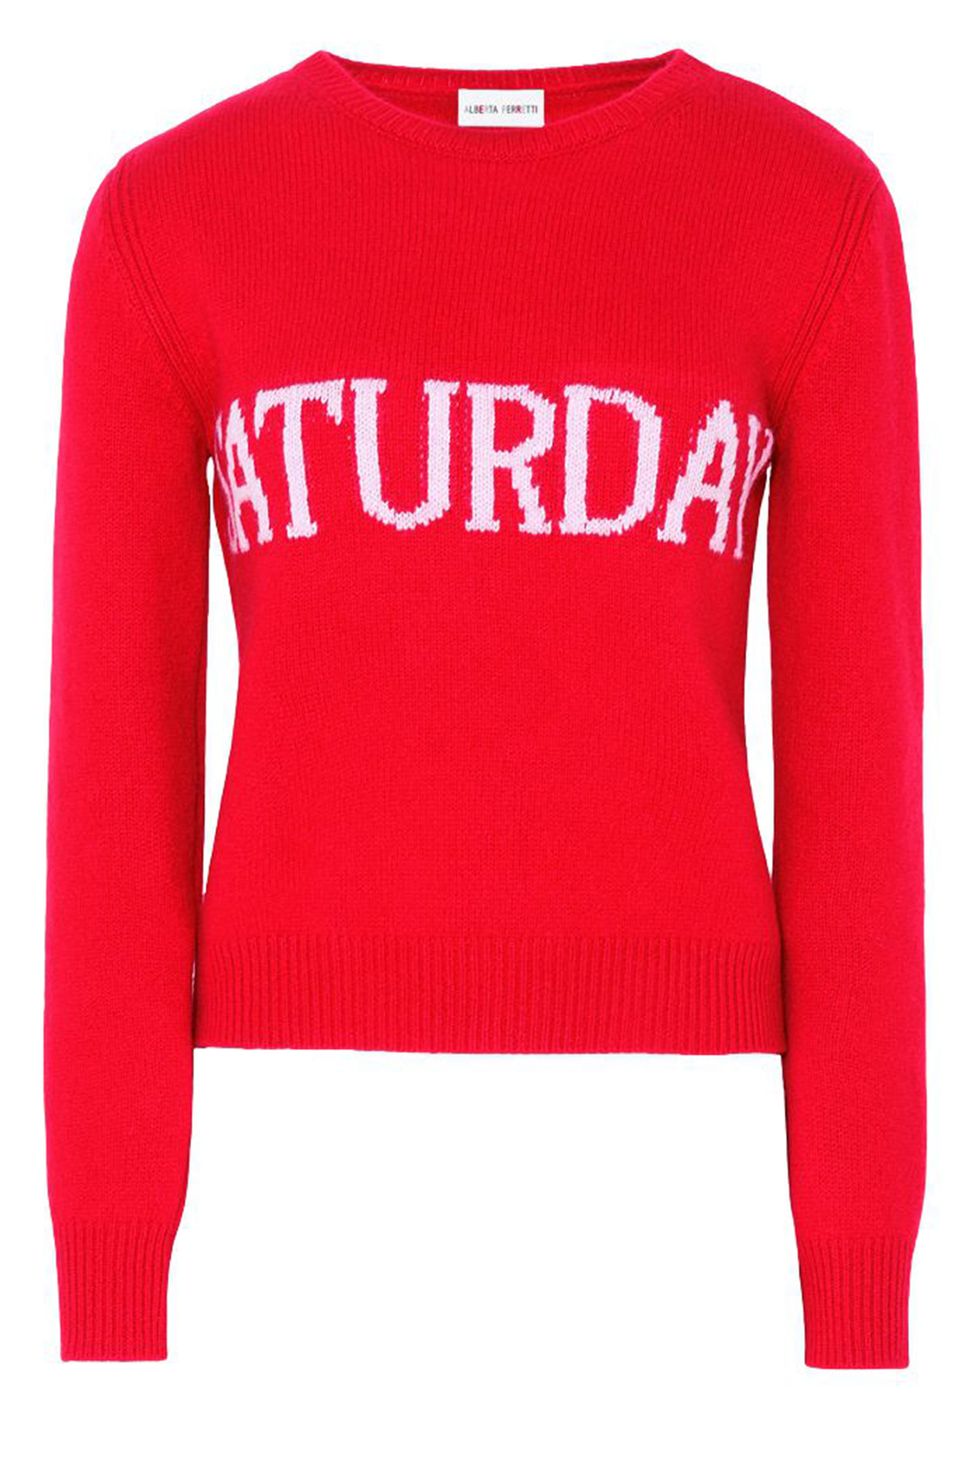 Clothing, Sleeve, Long-sleeved t-shirt, Red, Sweater, Outerwear, Jersey, Top, Pink, T-shirt, 